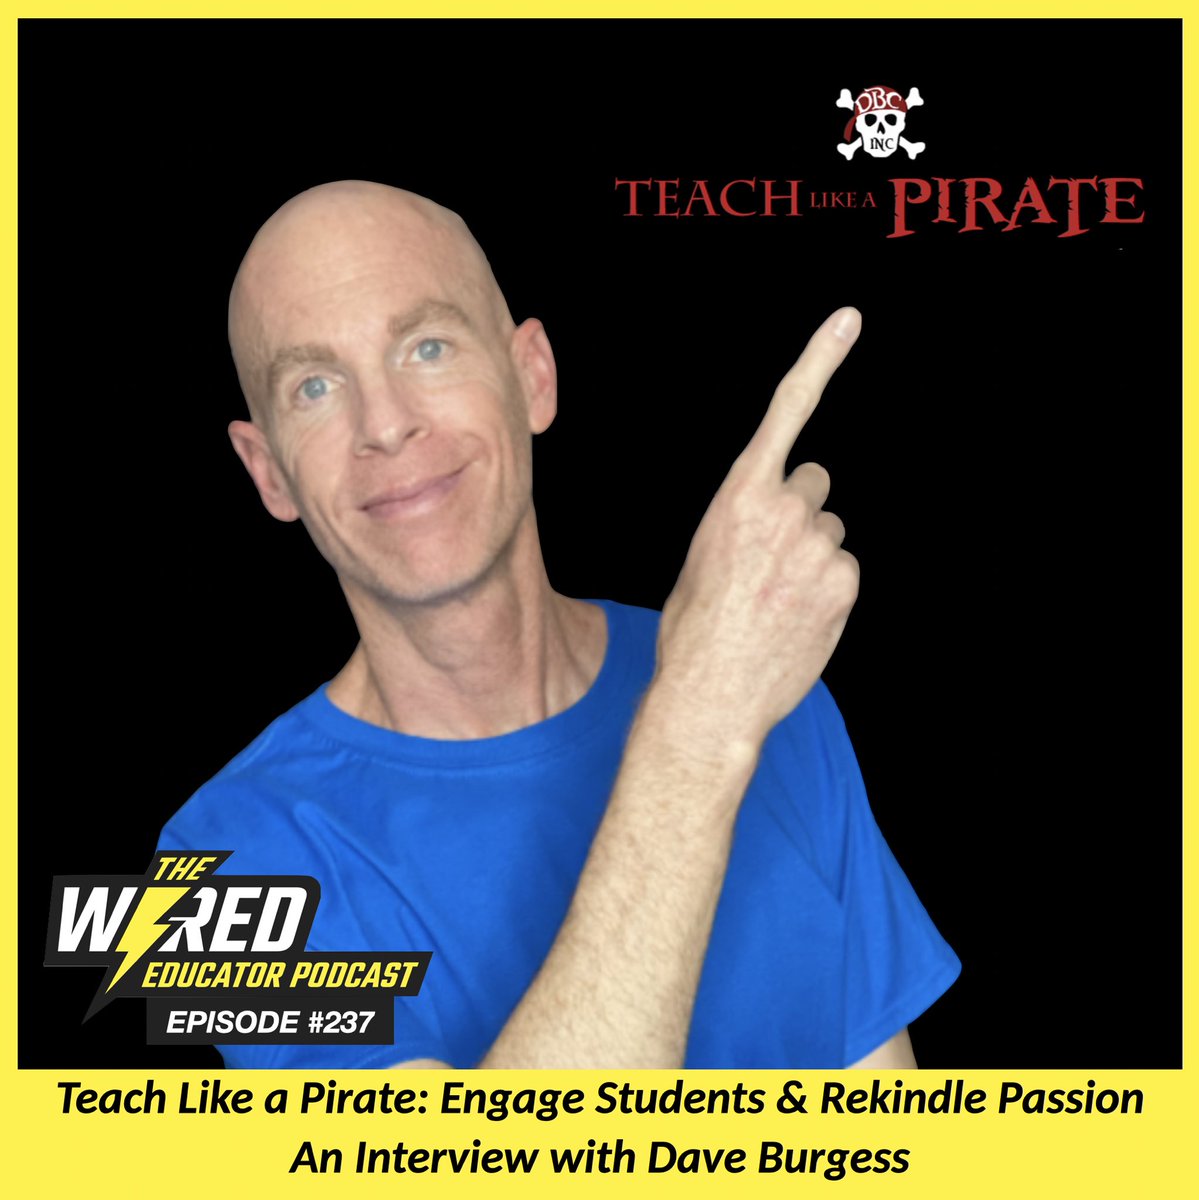 🚗💨 Perfect for your commute! New episode of the Wired Educator Podcast. ⚡️ An interview with Dave Burgess @burgessdave author of Teach Like a Pirate. 🎤⚡️🎧🏴‍☠️ On Apple Podcasts: podcasts.apple.com/us/podcast/the… On Spotify: open.spotify.com/episode/7INNyT… On site: wirededucator.com/wep237/